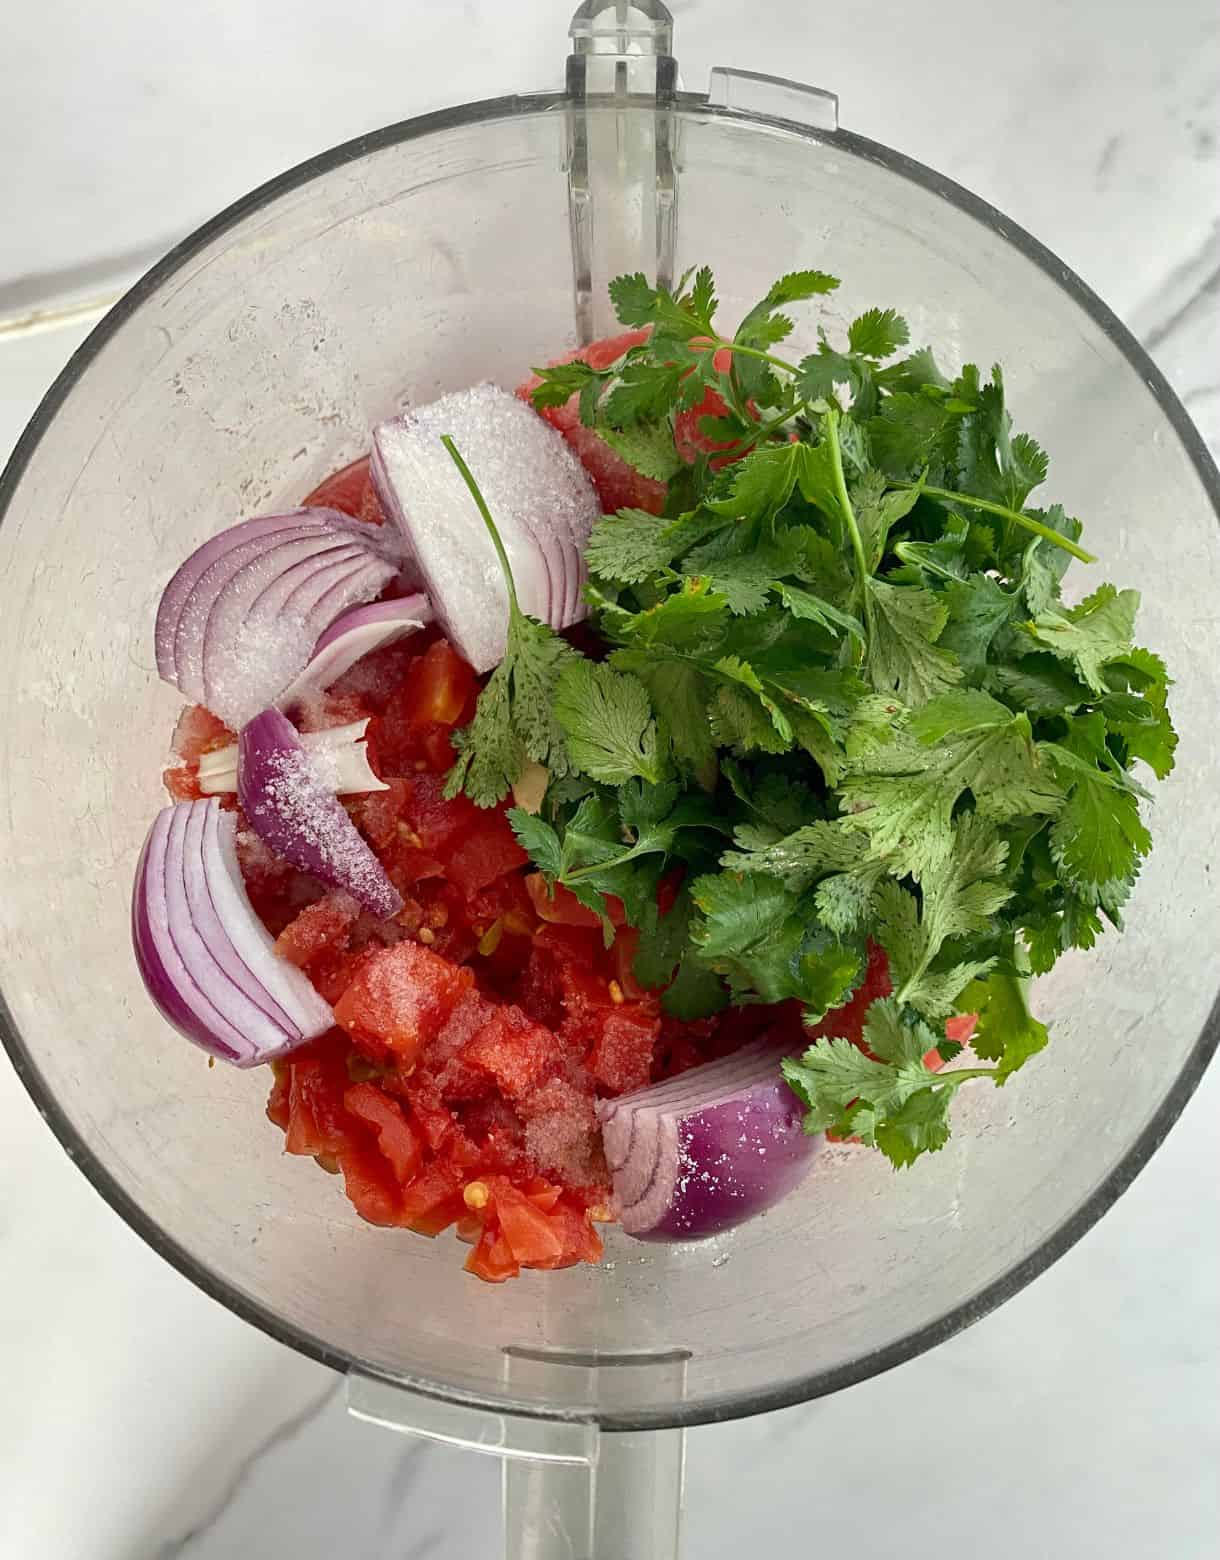 A food processor with the ingredients added for Jalapeno Salsa but not yet processed.